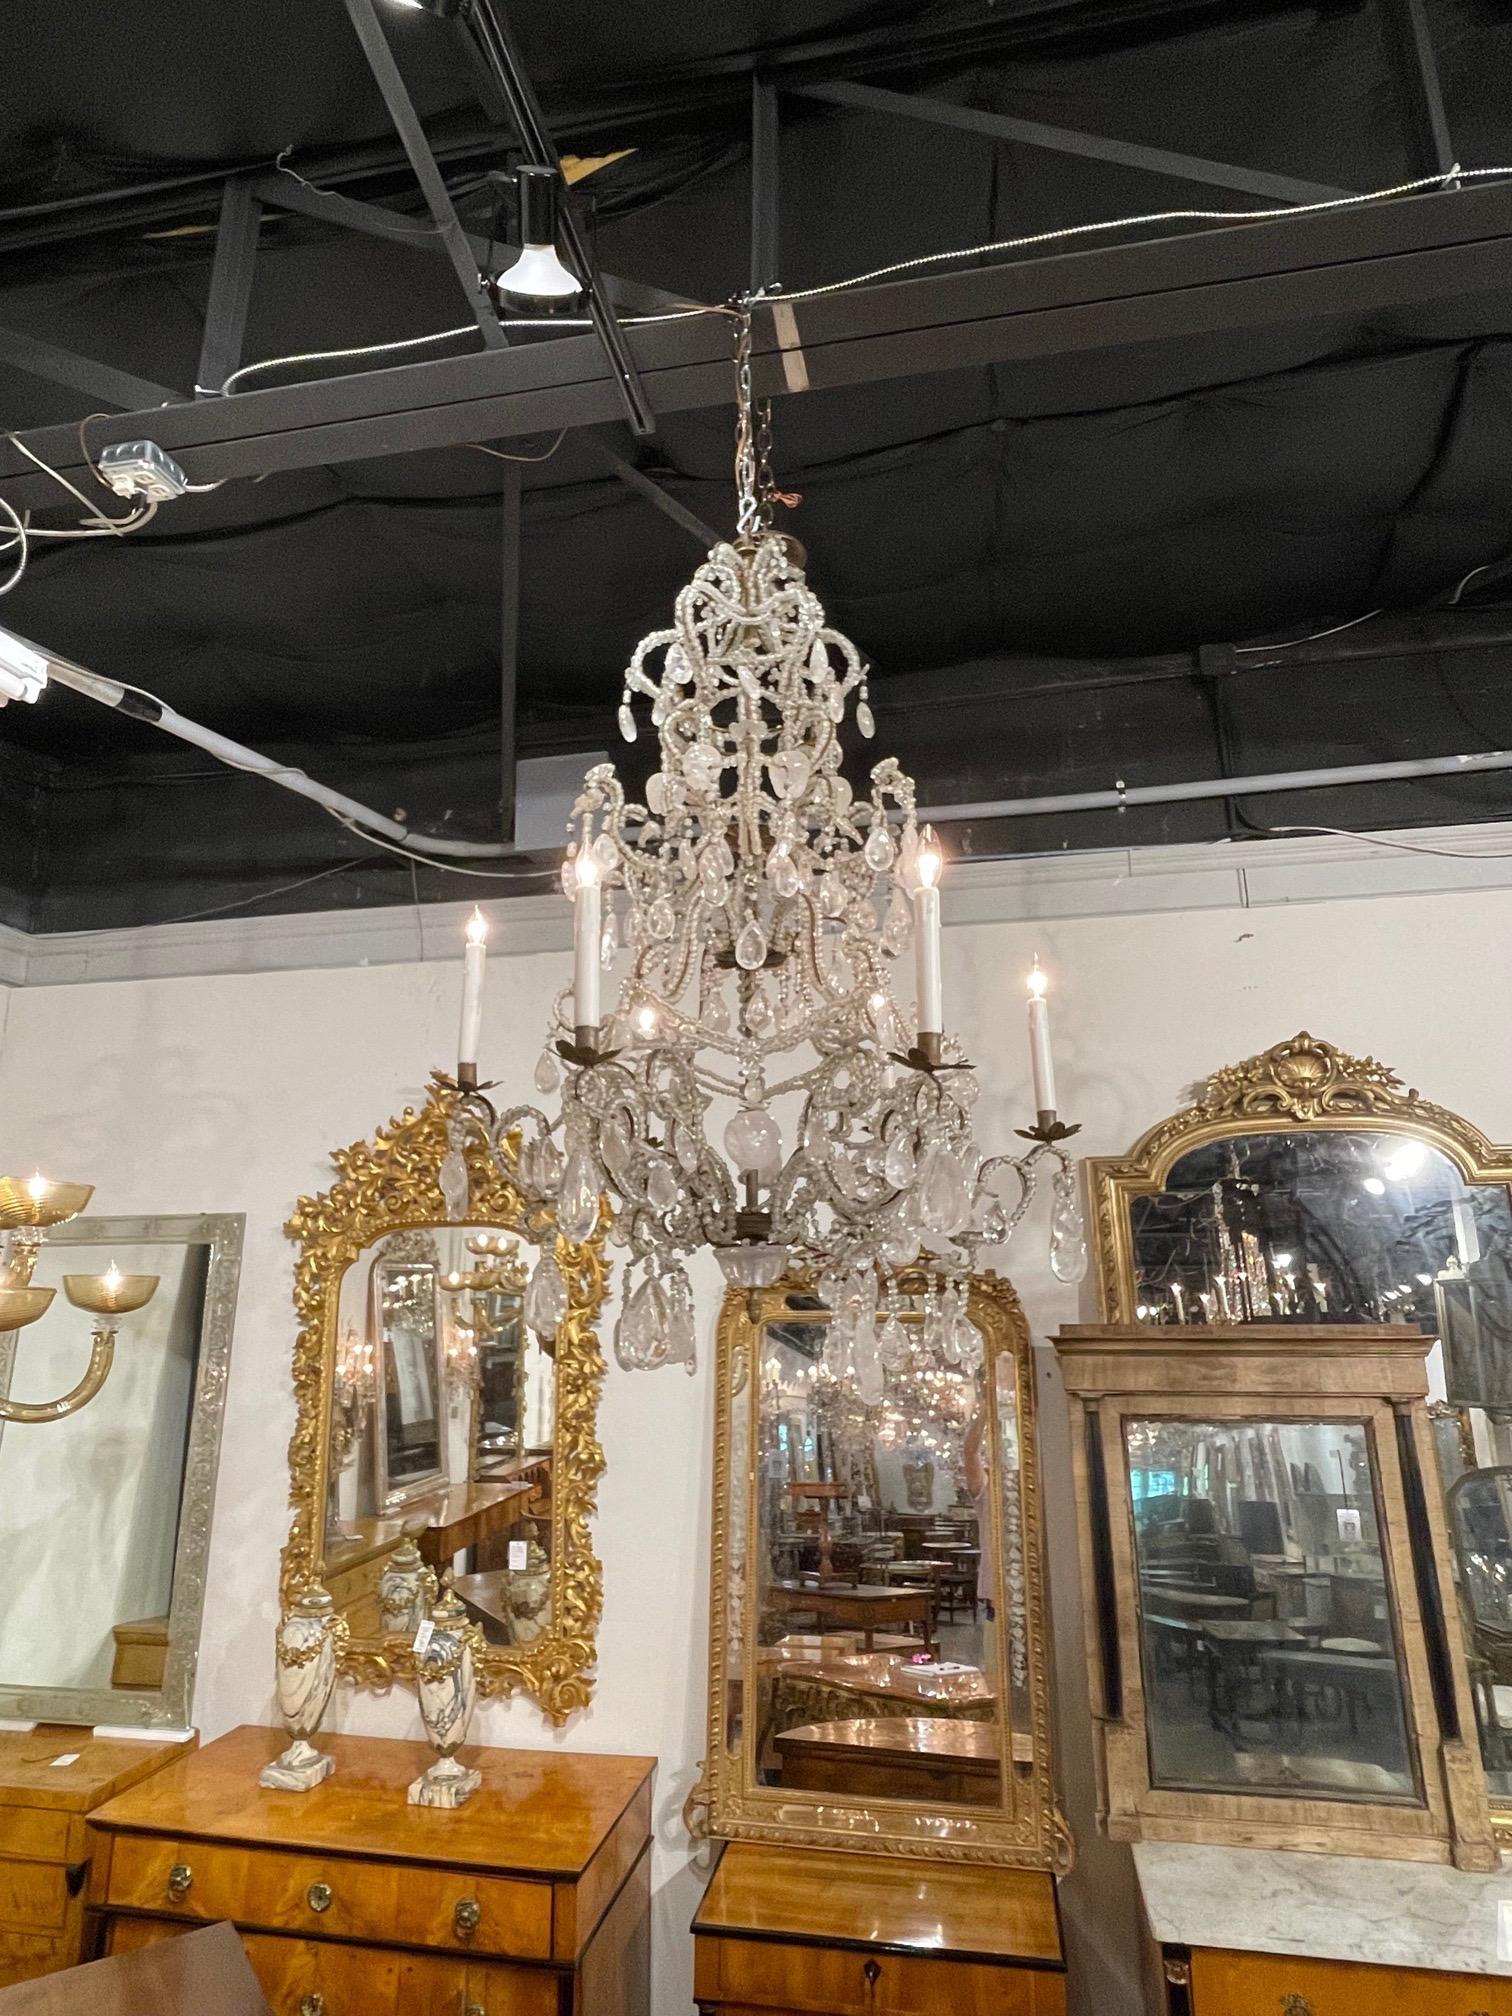 Gorgeous 19th century French rock crystal chandelier with 6 lights. Covered in lovely rock crystals and the decorative base is adorned with beads. A very elegant look!